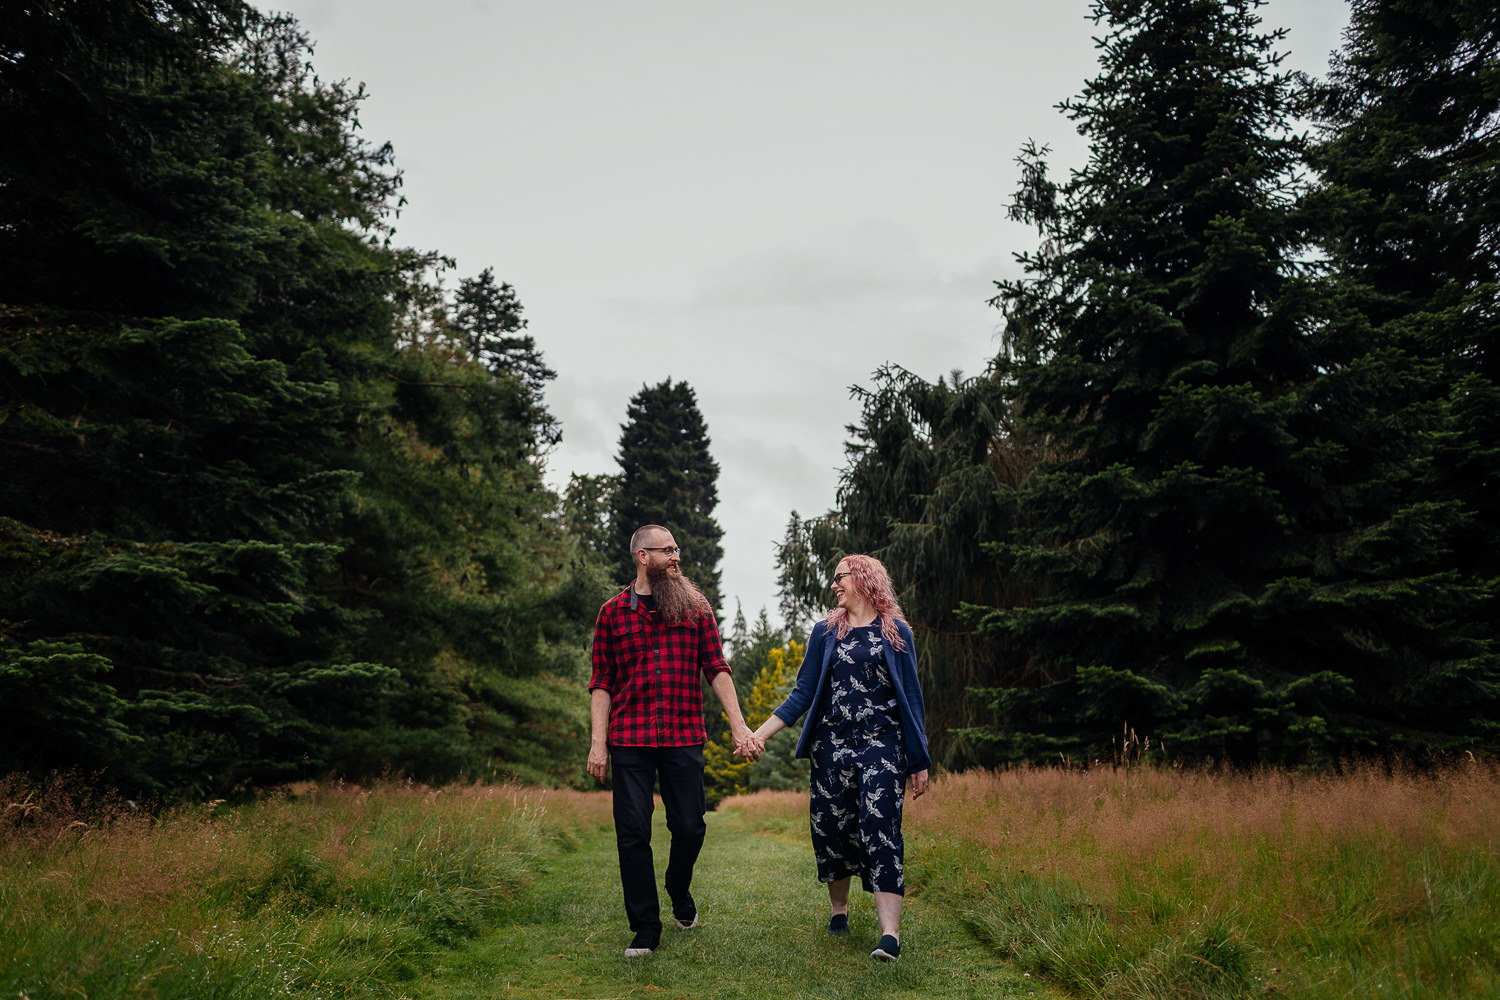 Perth Scone palace couples shoot in woods